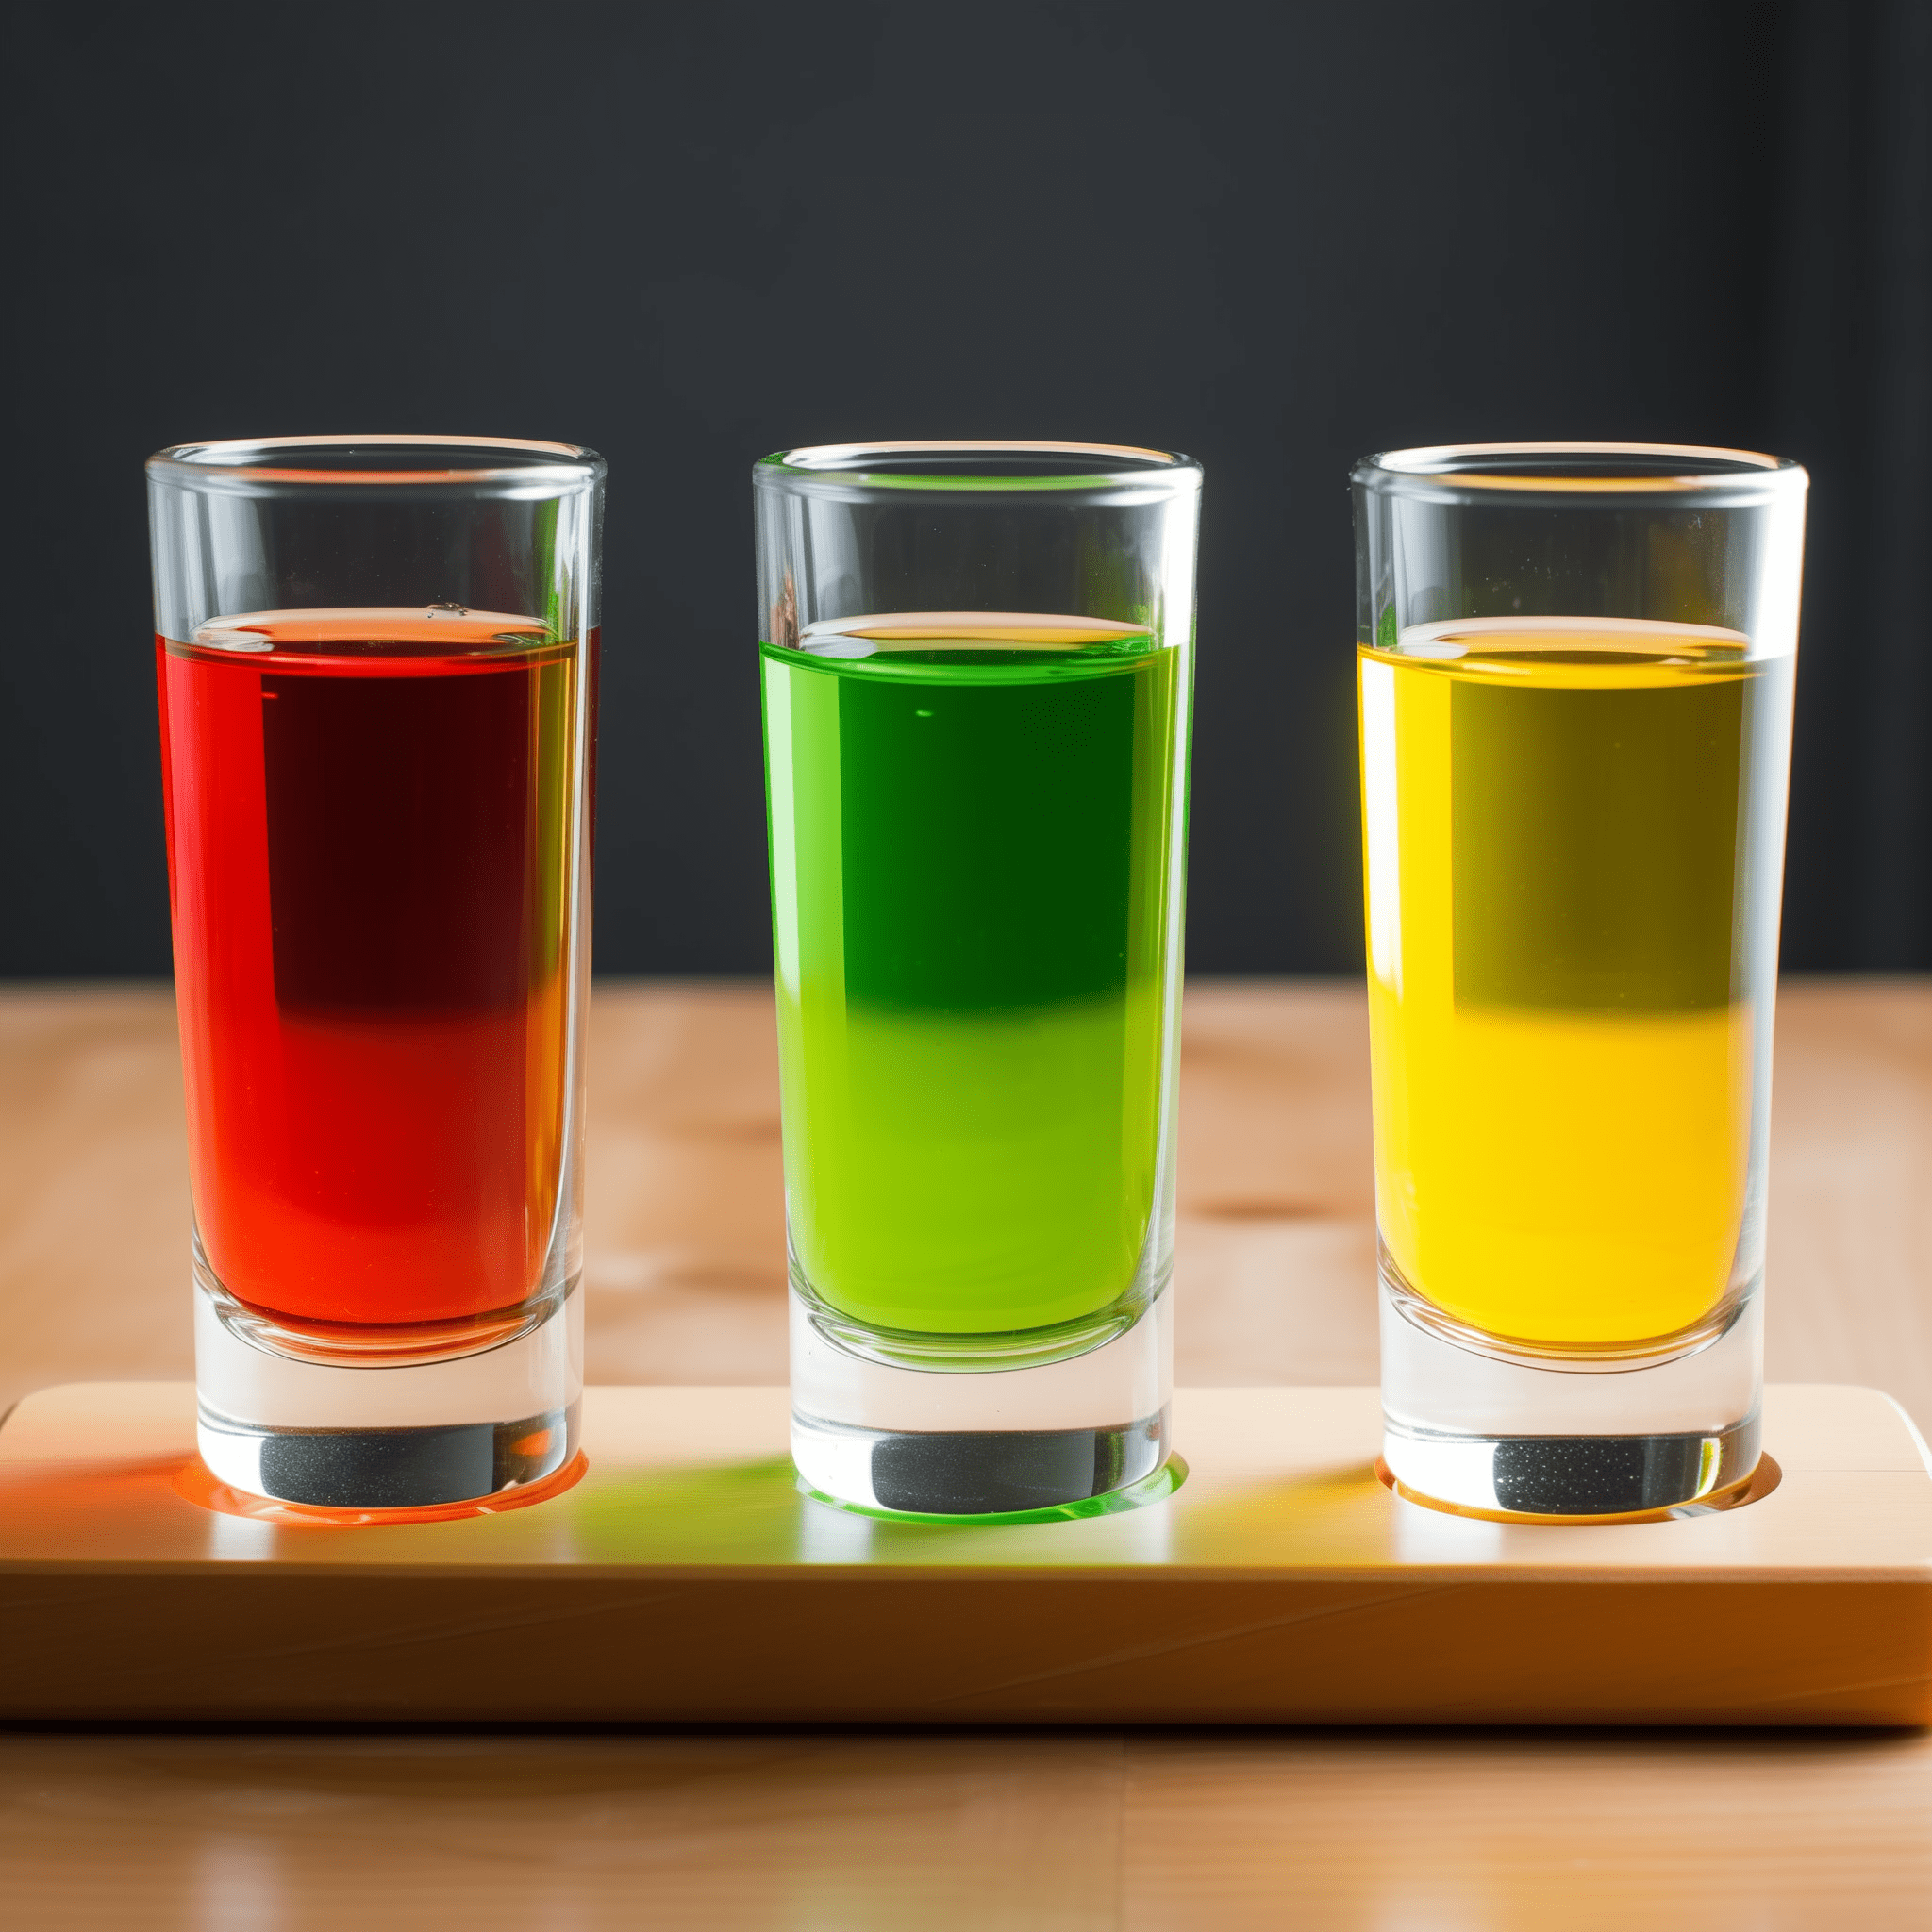 Midwest Stop Light Recipe - The Midwest Stop Light offers a journey through flavors. The first shot is spicy and warm from the cinnamon schnapps, followed by a smooth and sweet hit from the apricot schnapps, and finished with the bold and earthy notes of tequila.